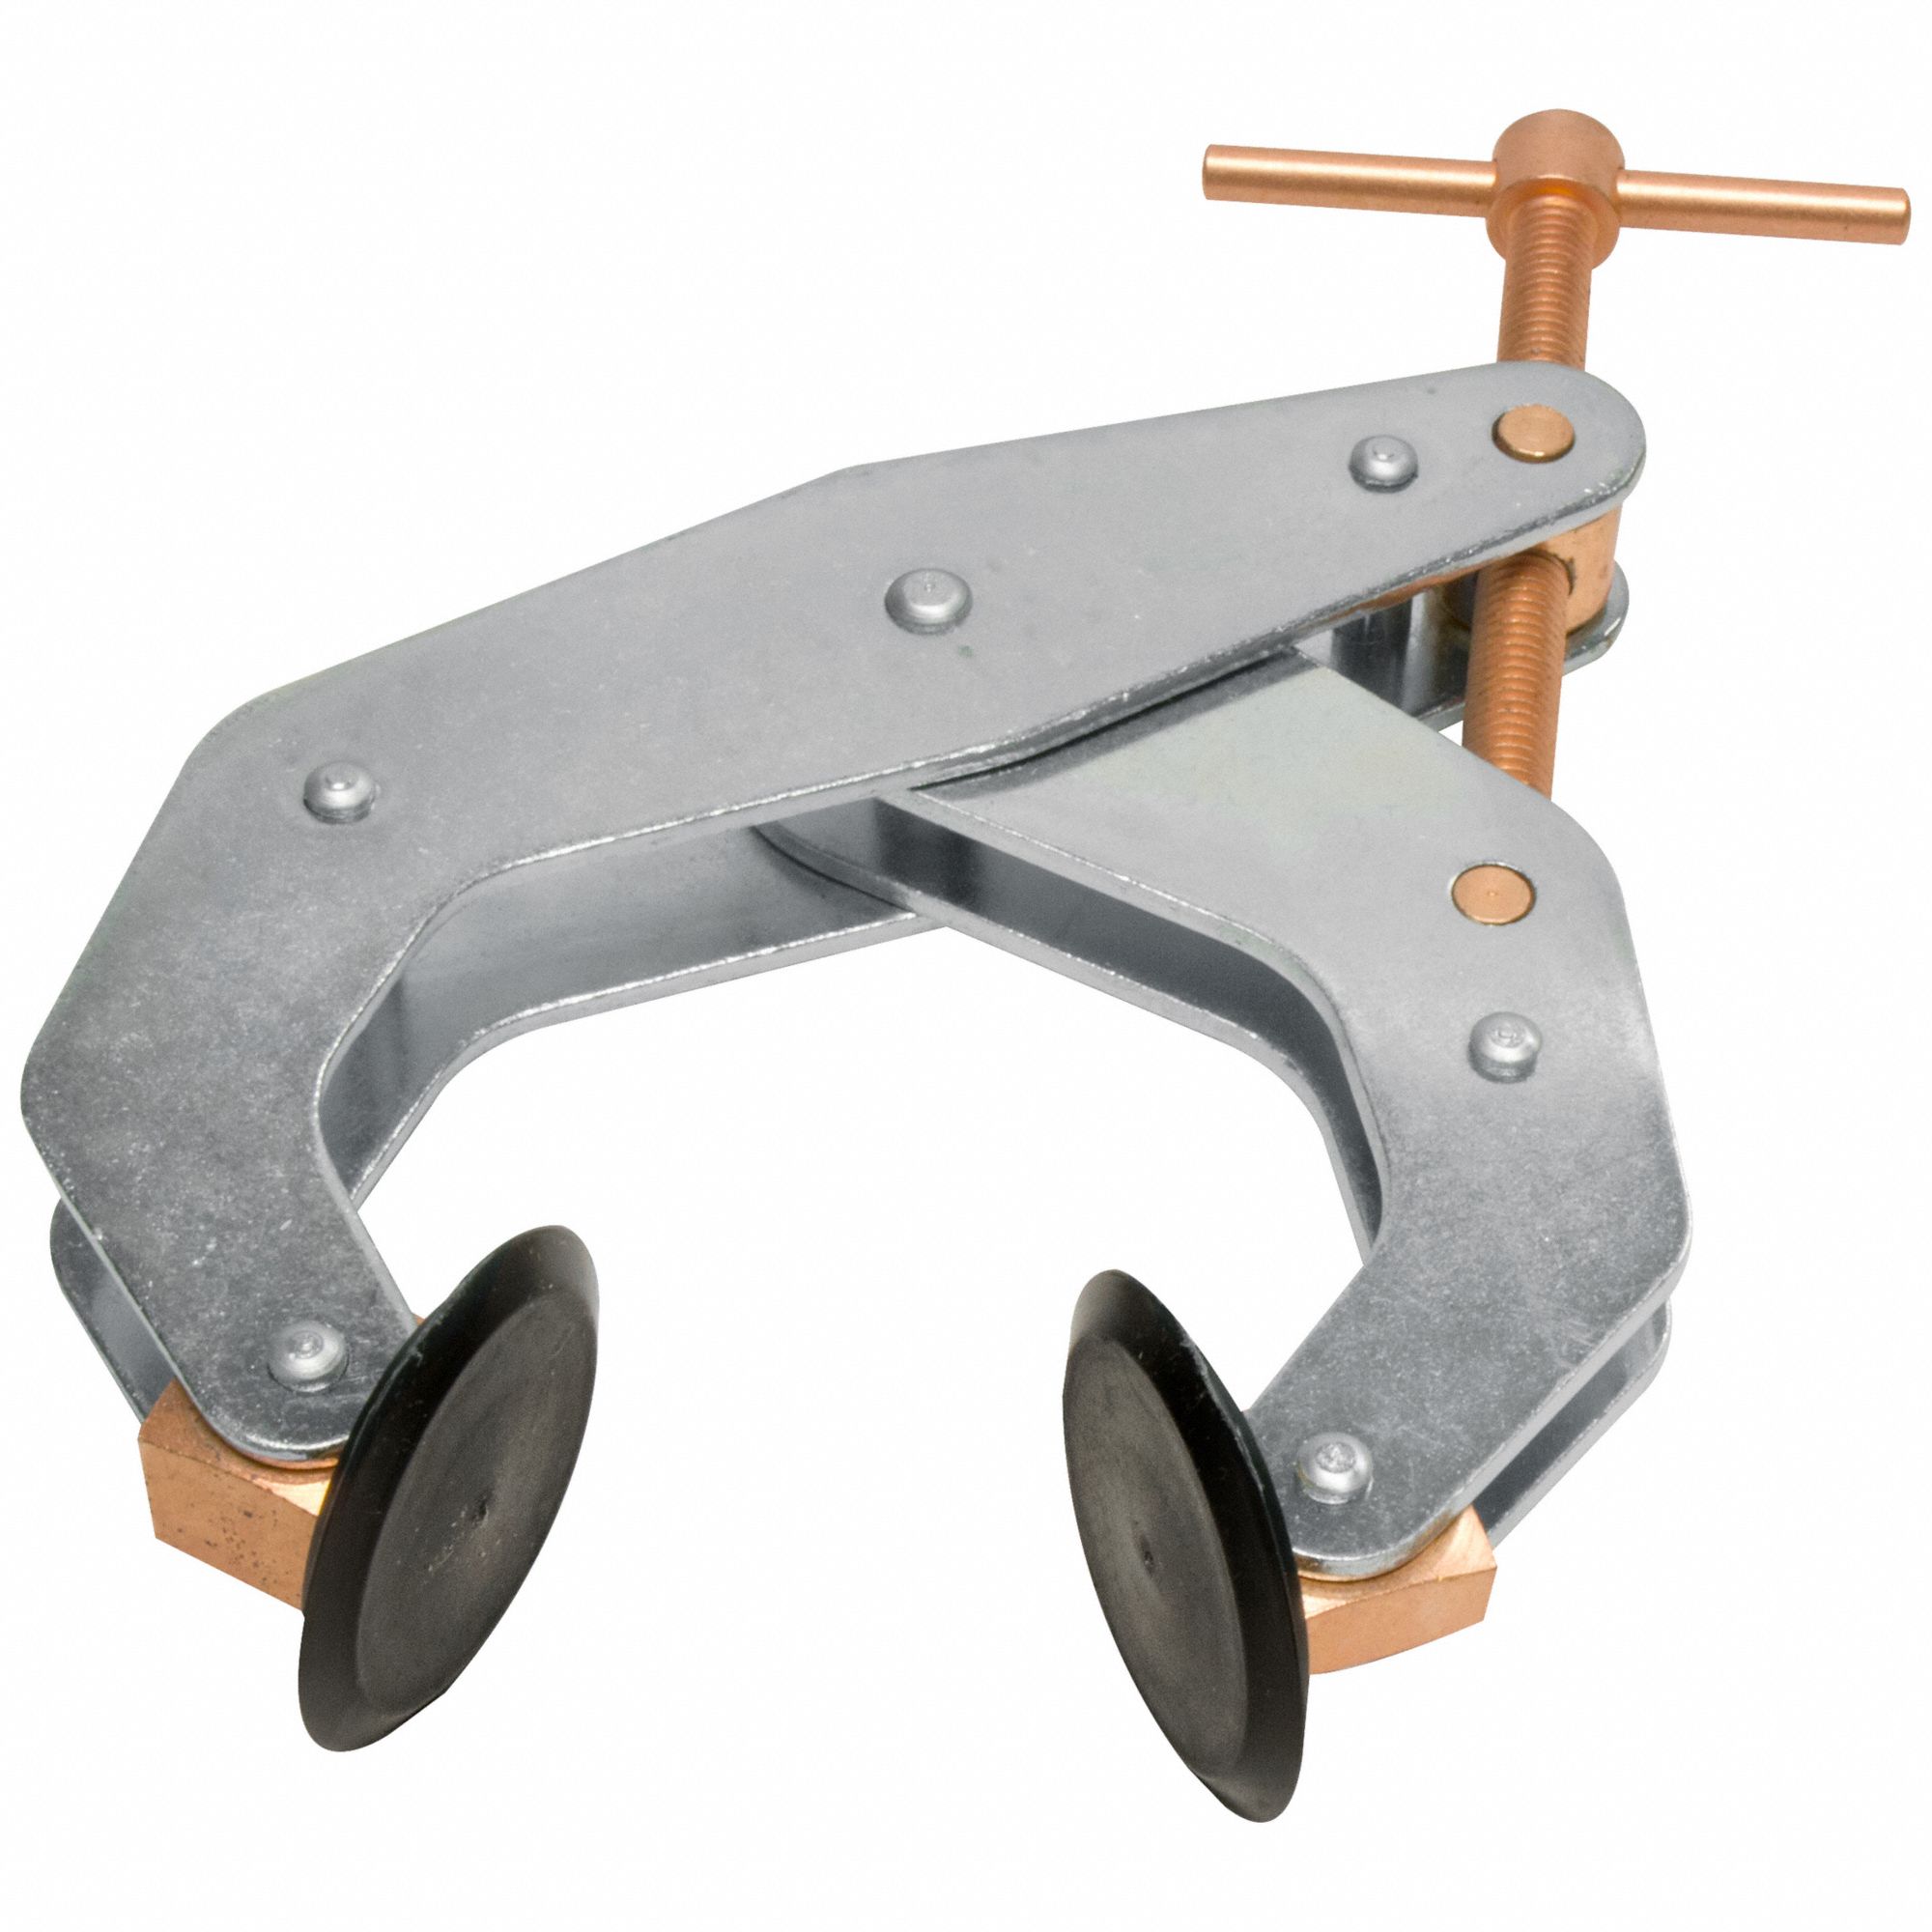 Cantilever Clamp: Medium Duty, Flat, Fixed T Handle, 4 1/2 in Jaw Opening, Steel